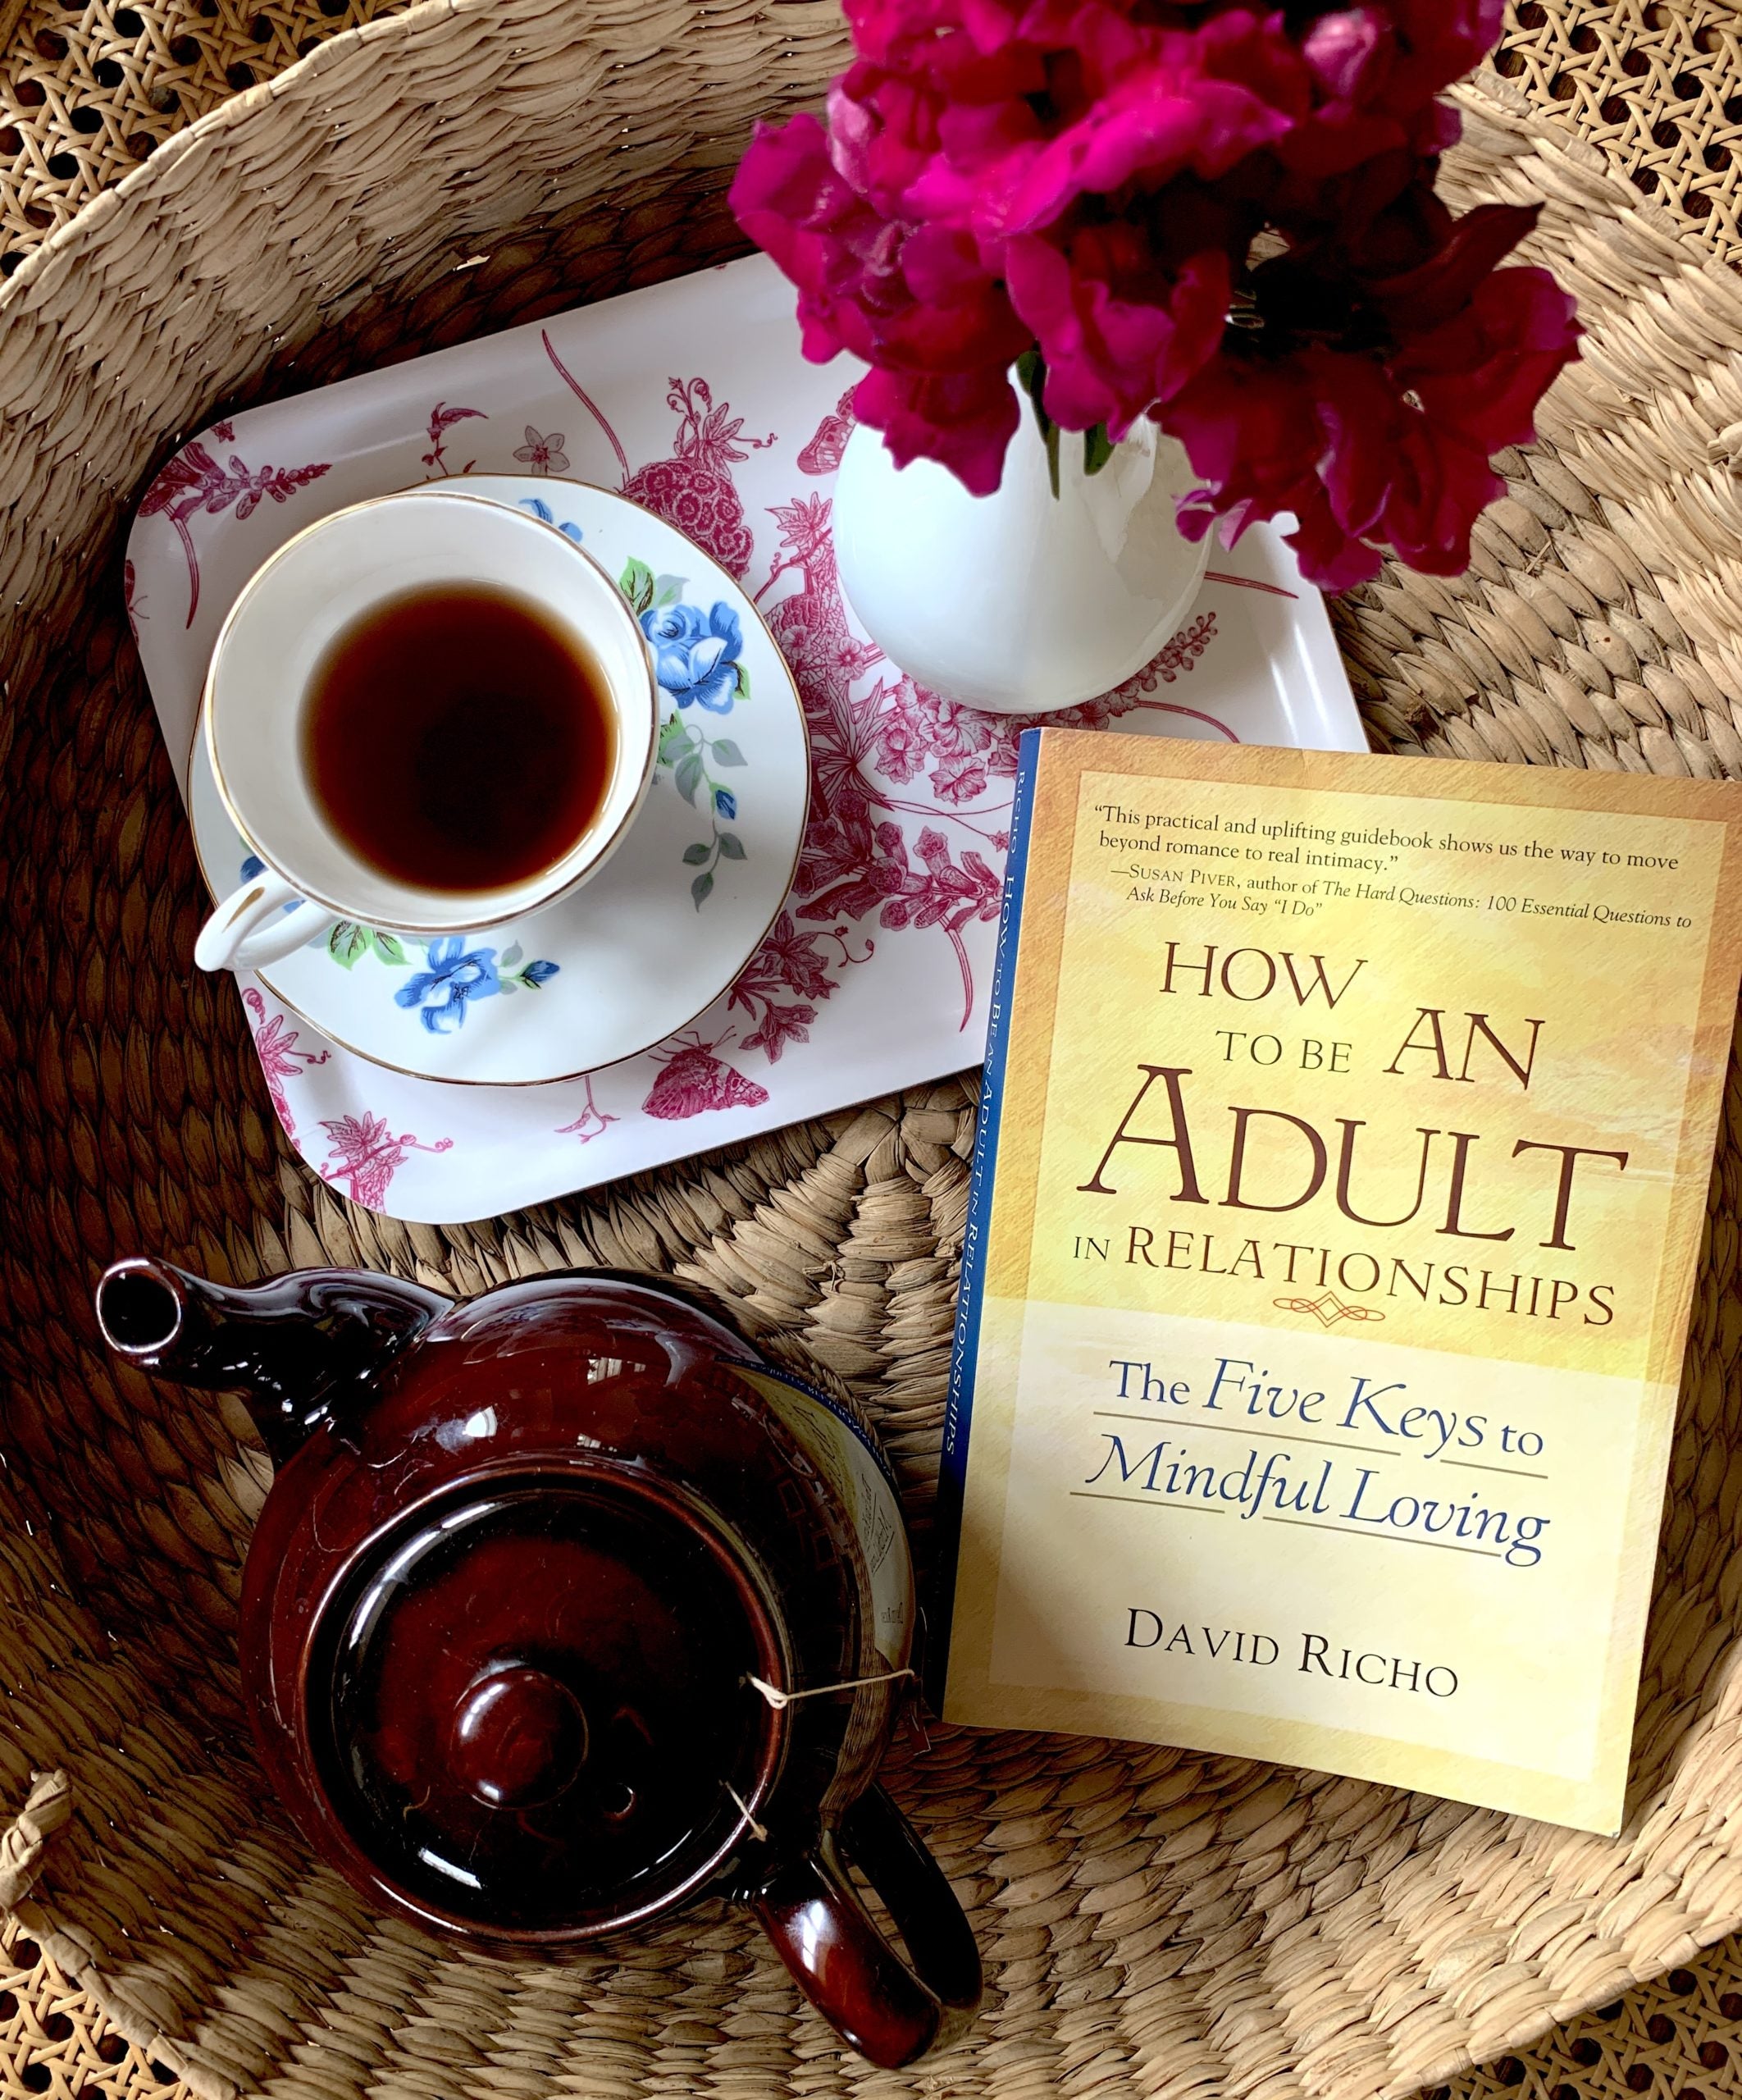 The Five Keys to Mindful Loving: Lessons from 'How to Be an Adult in Relationships